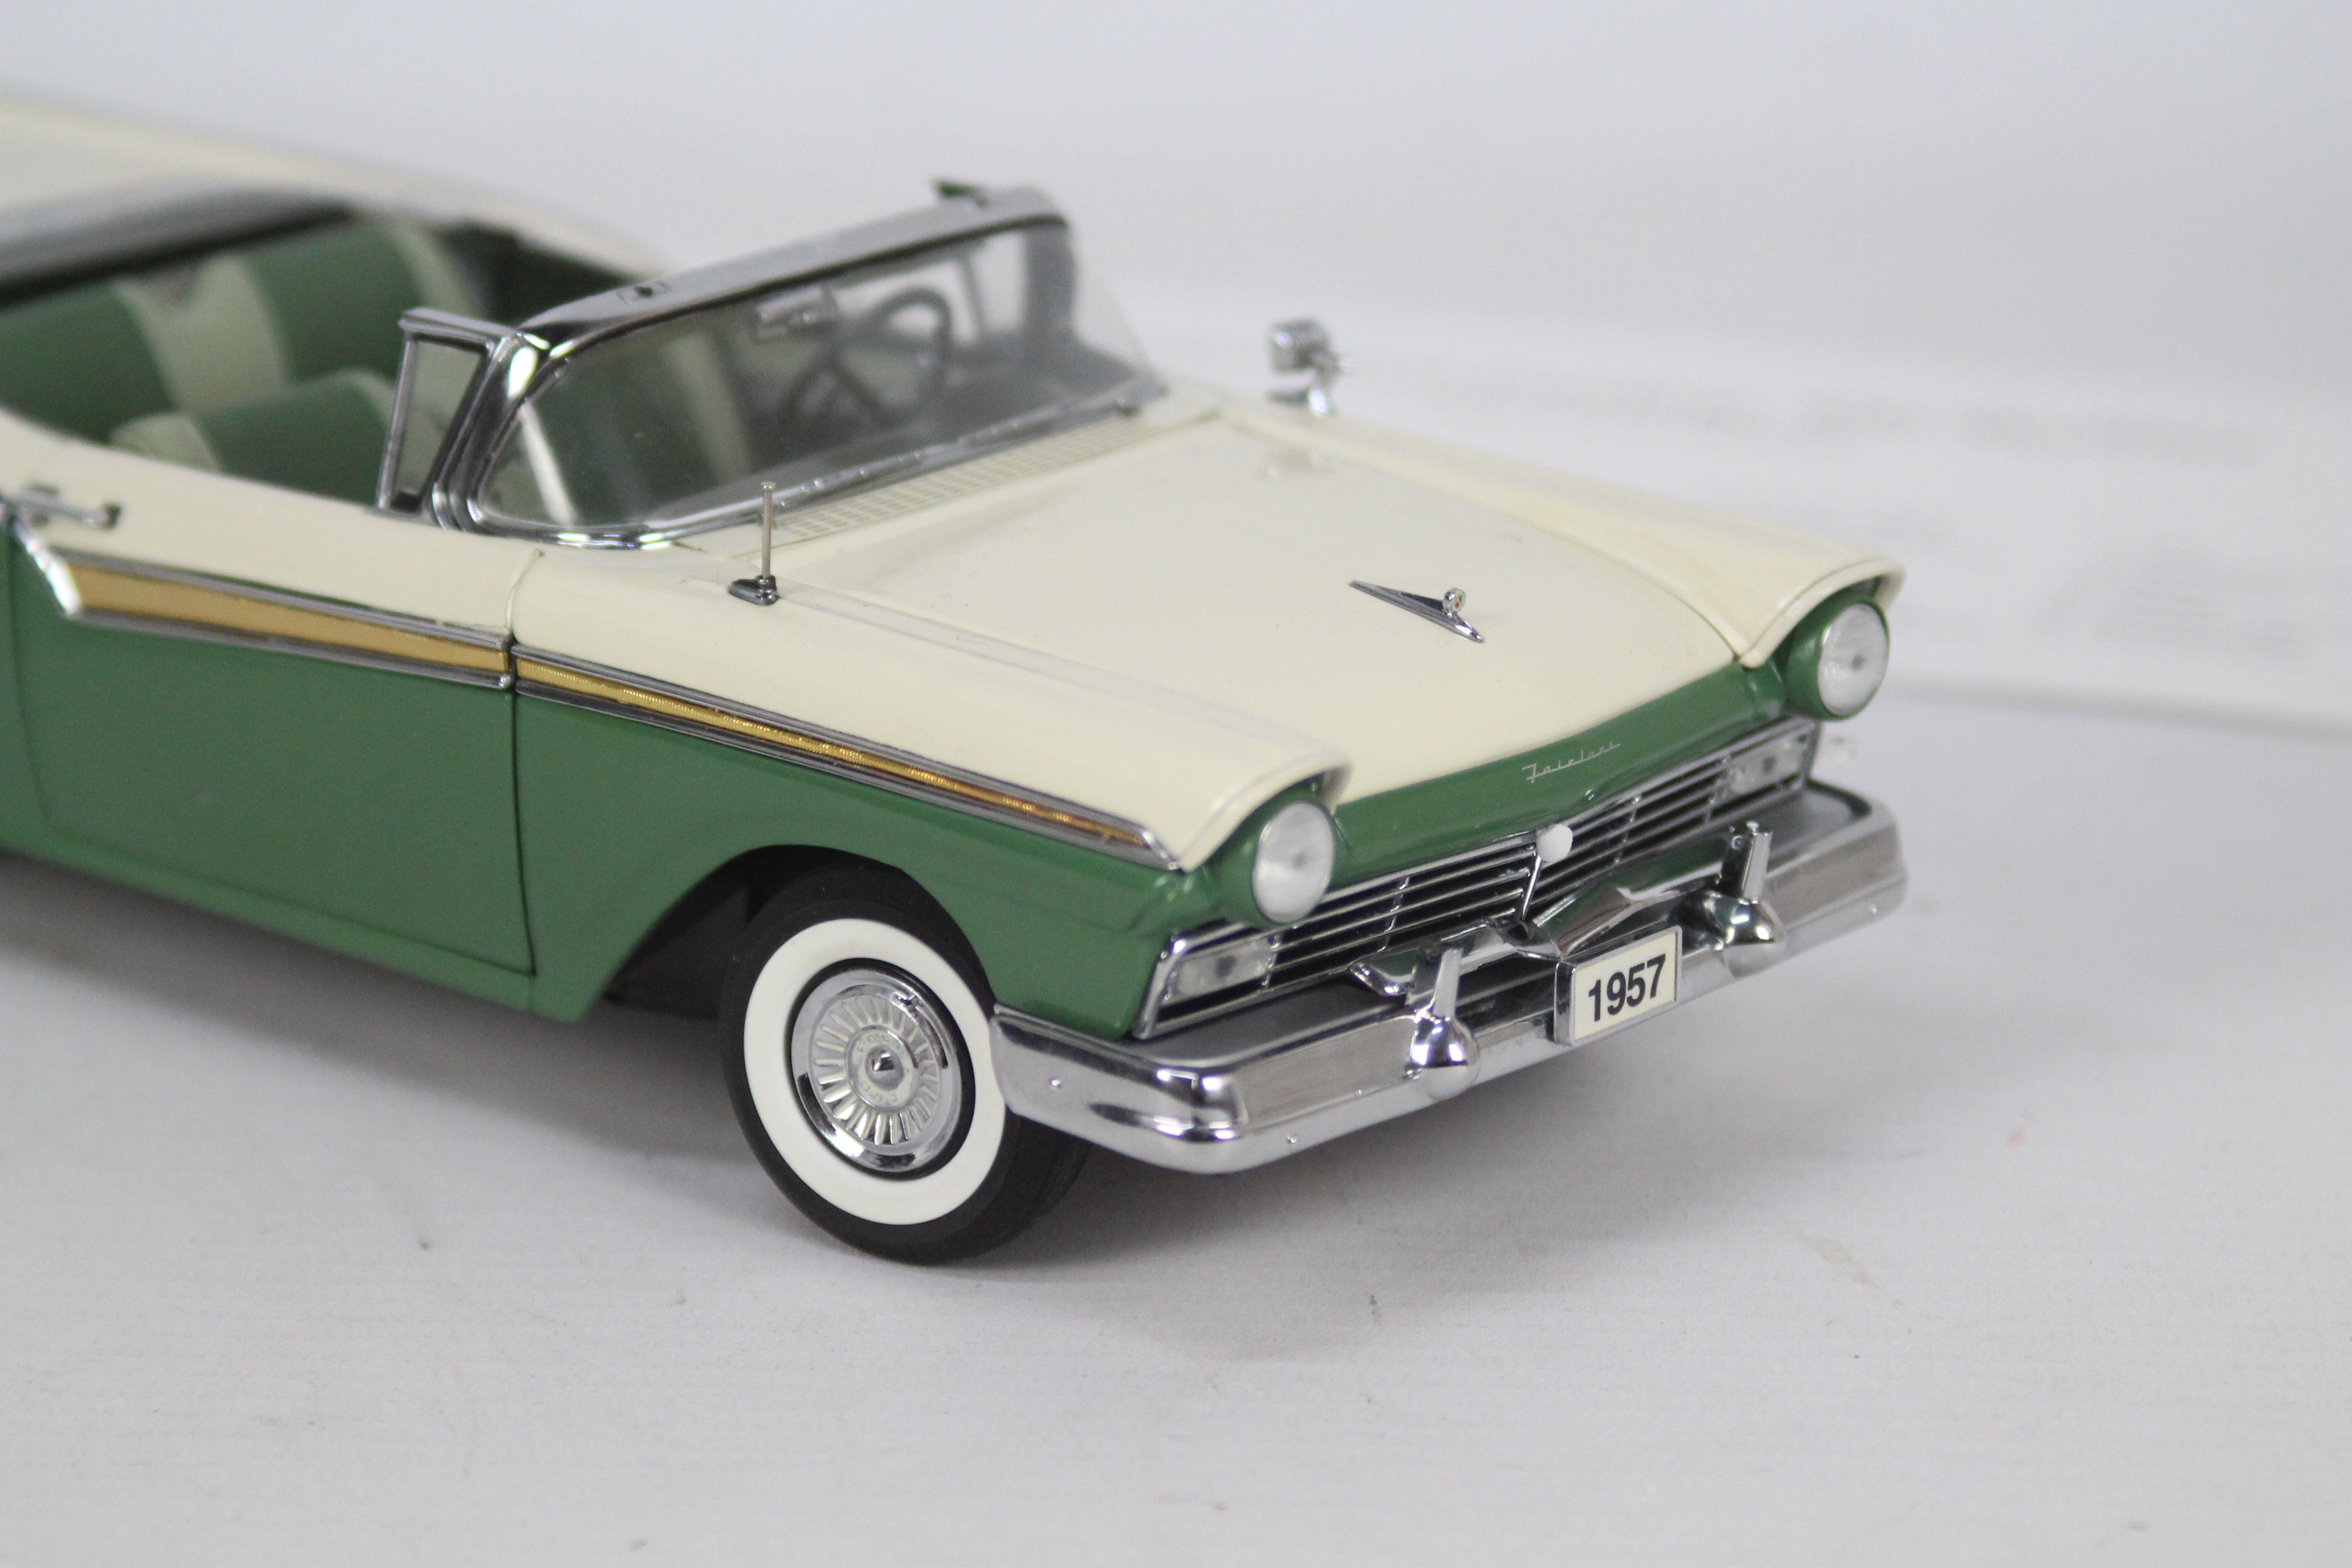 Franklin Mint - A boxed 1:24 scale 1957 Ford Fairlane 500 Skyliner by Franklin Mint. - Image 5 of 5